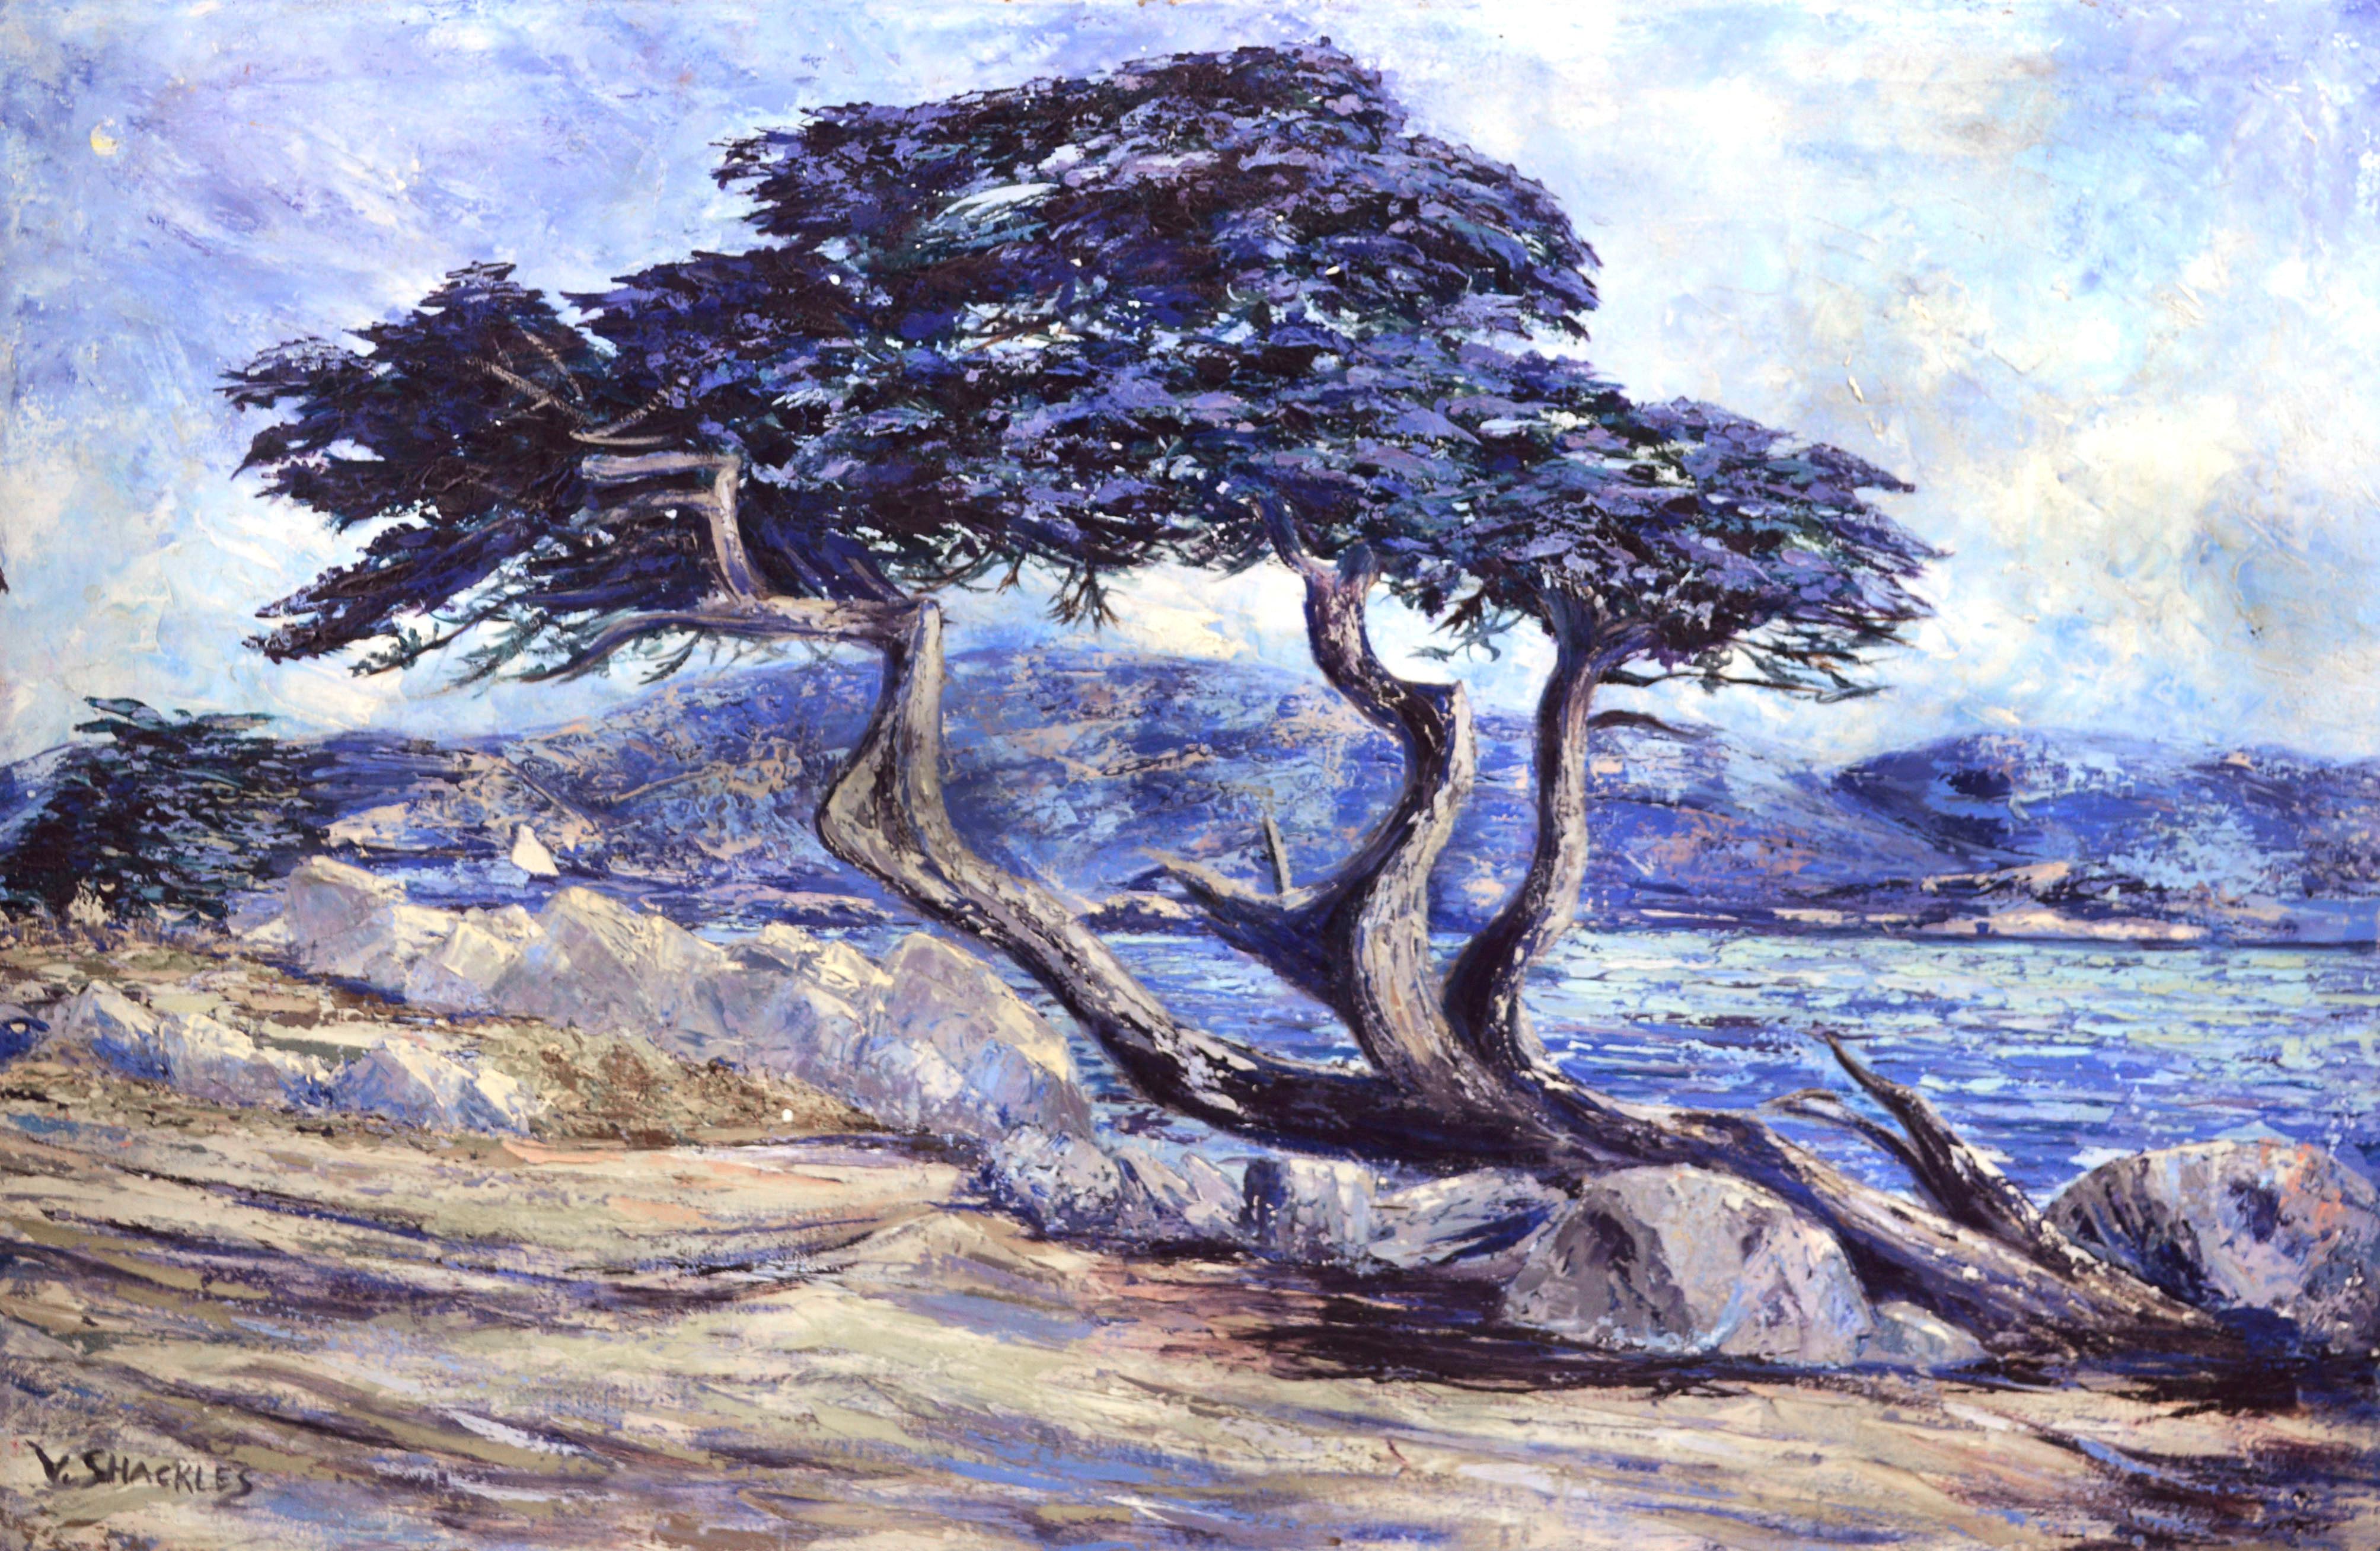 Virginia Shackles Landscape Painting - Point Lobos Cypress, Monterey Coastal Landscape with Cypress Tree 